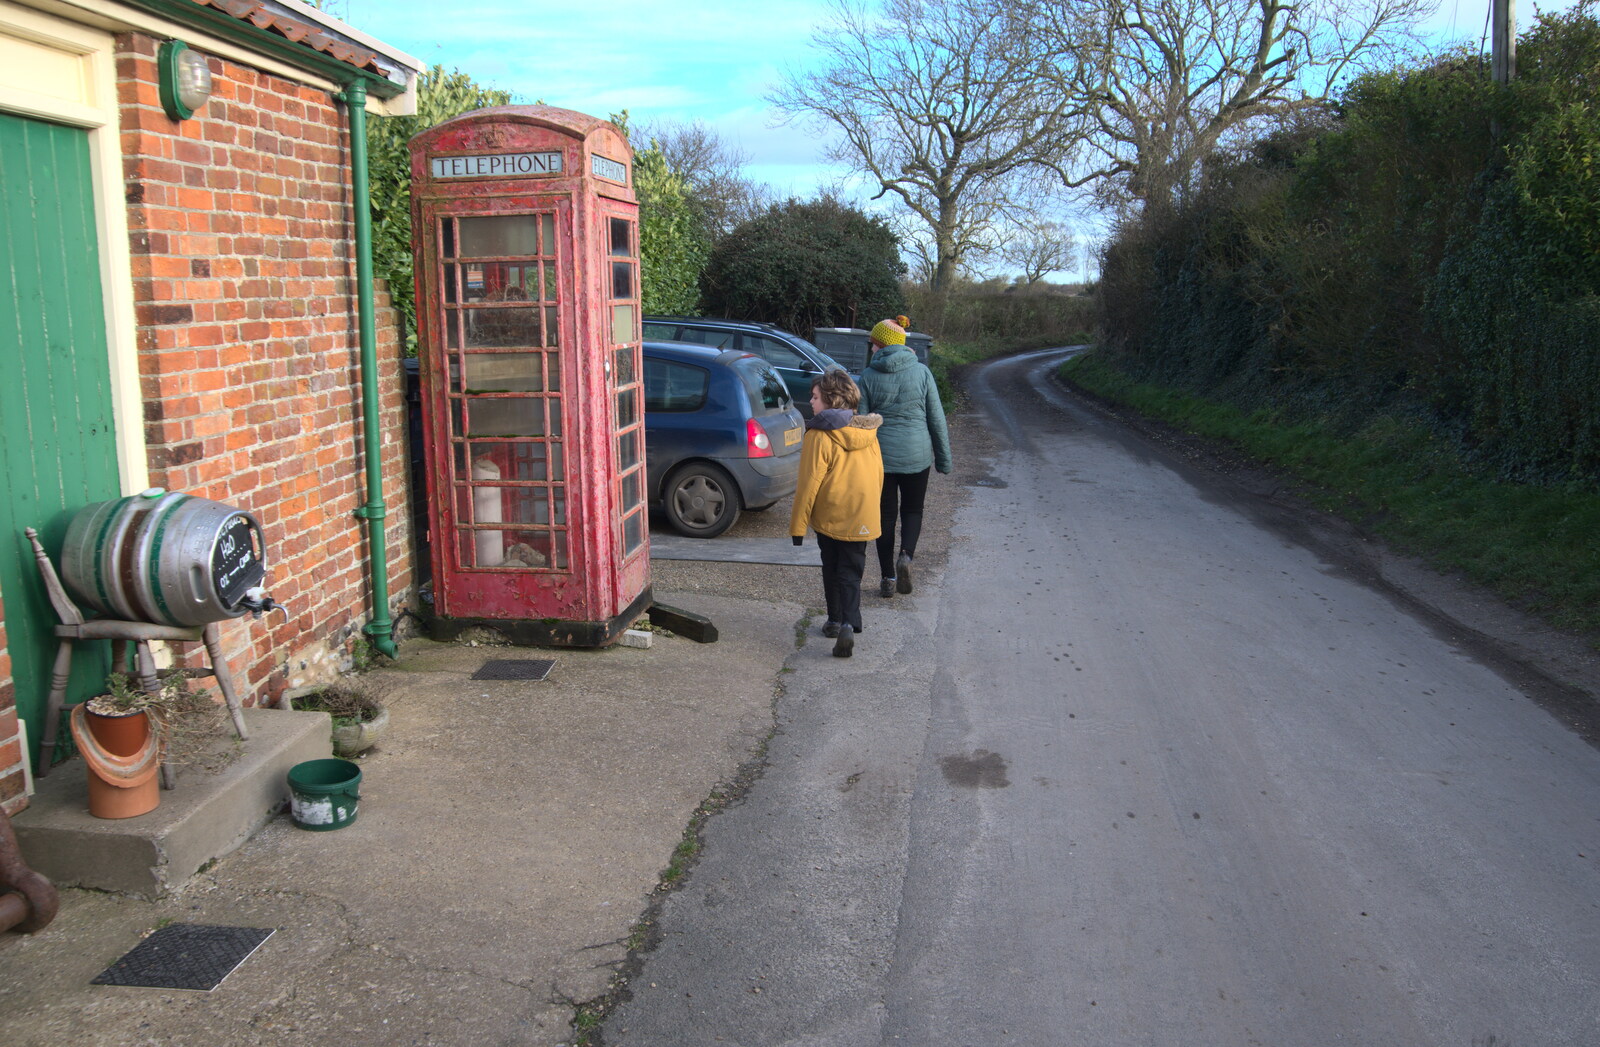 We wander off passed a wrecked K6 phone box from To See the Seals, Horsey Gap, Norfolk - 10th January 2020